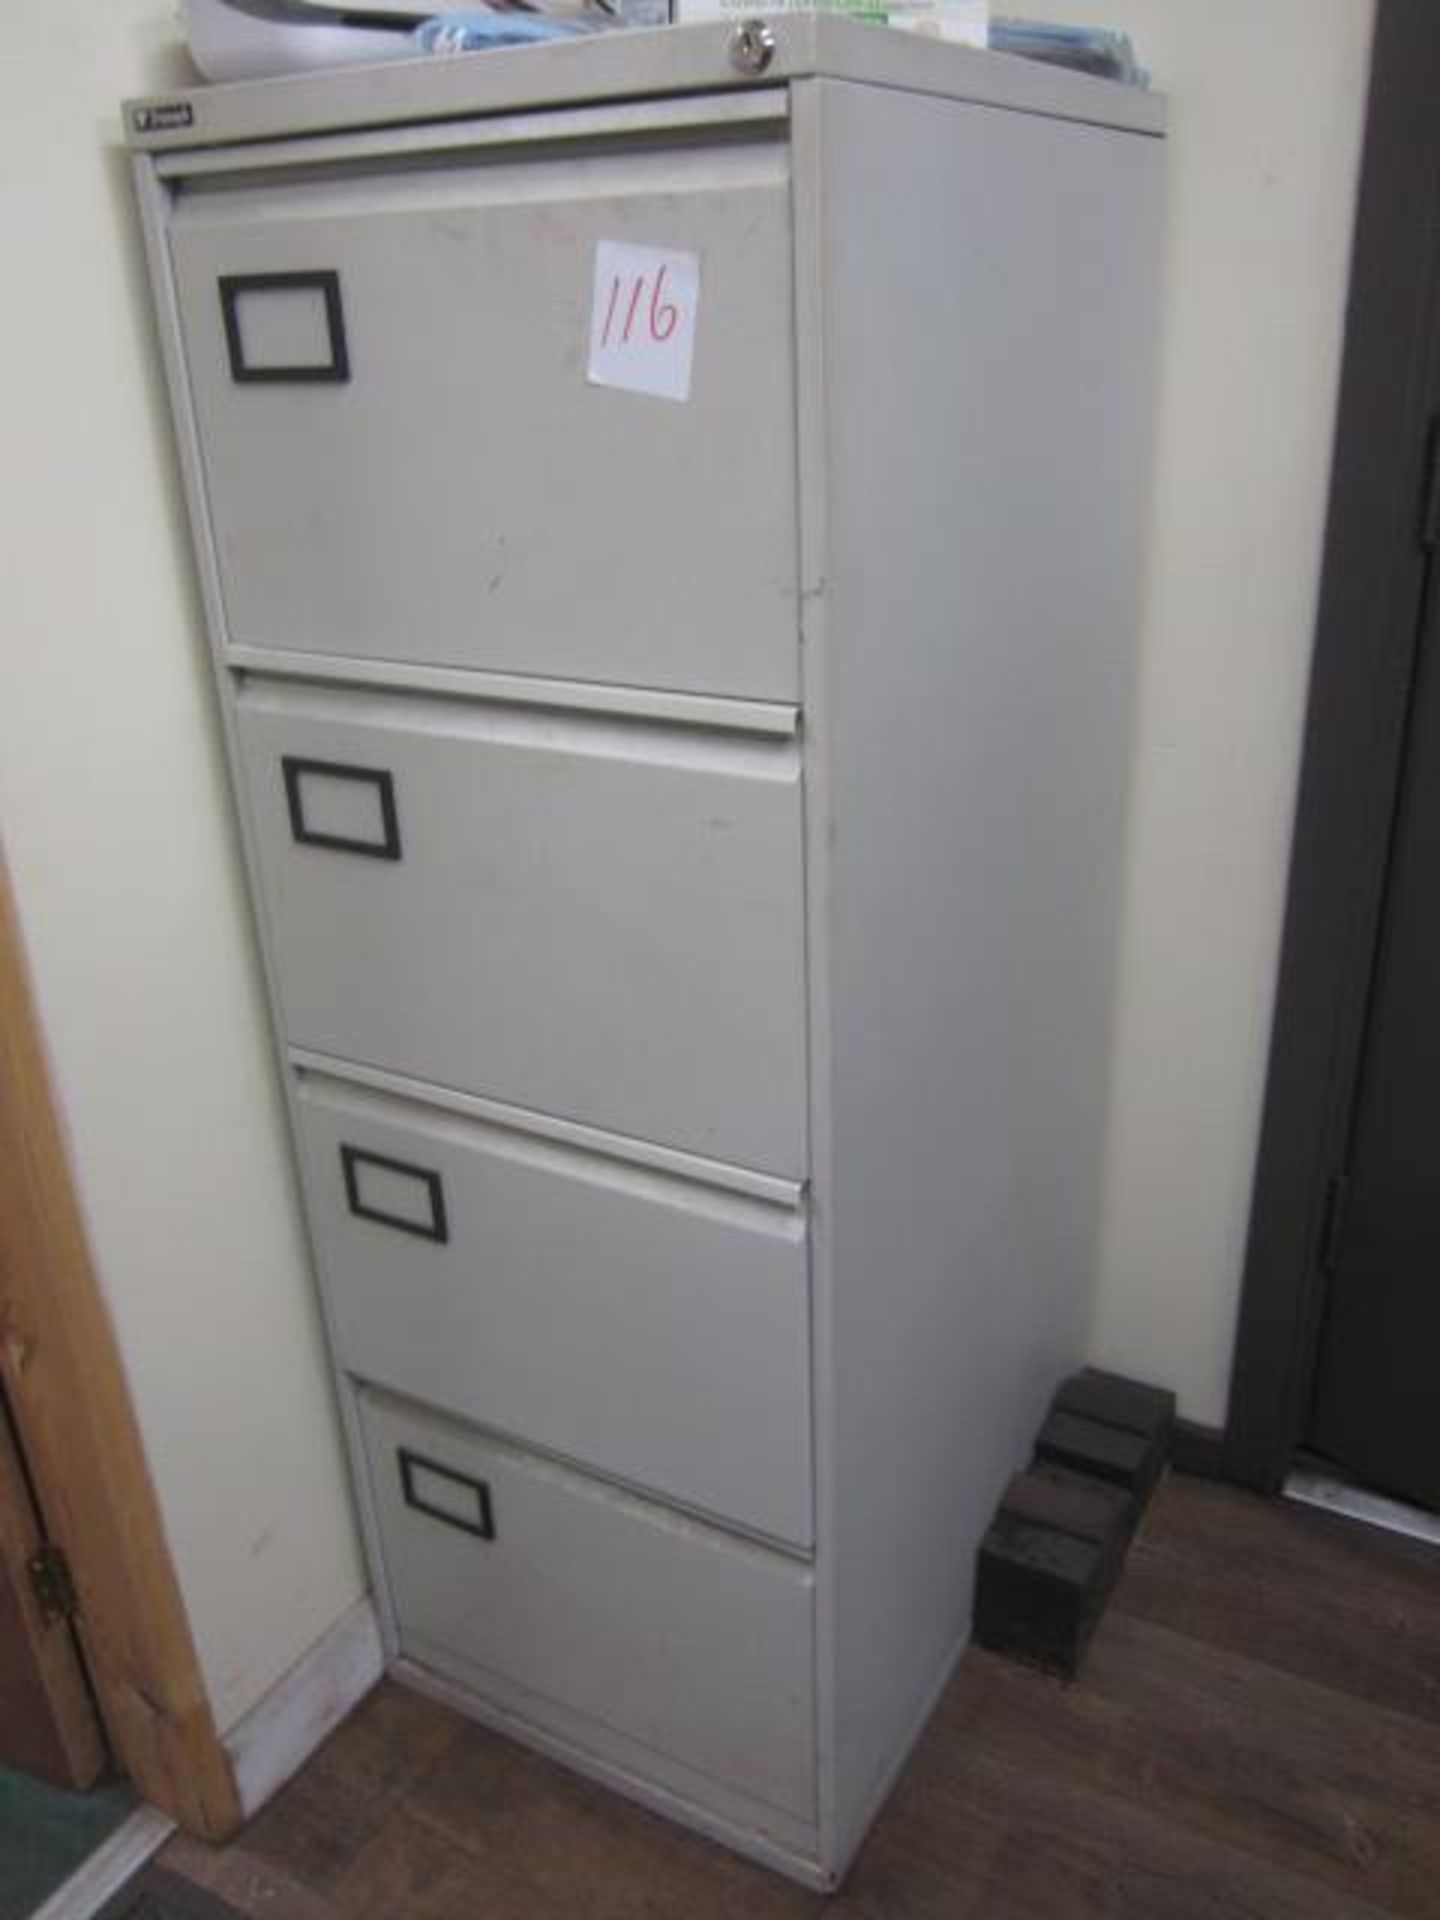 Metal 2 door storage cupboard with contents of office consumables including pens, envelopes, Comb - Image 6 of 8